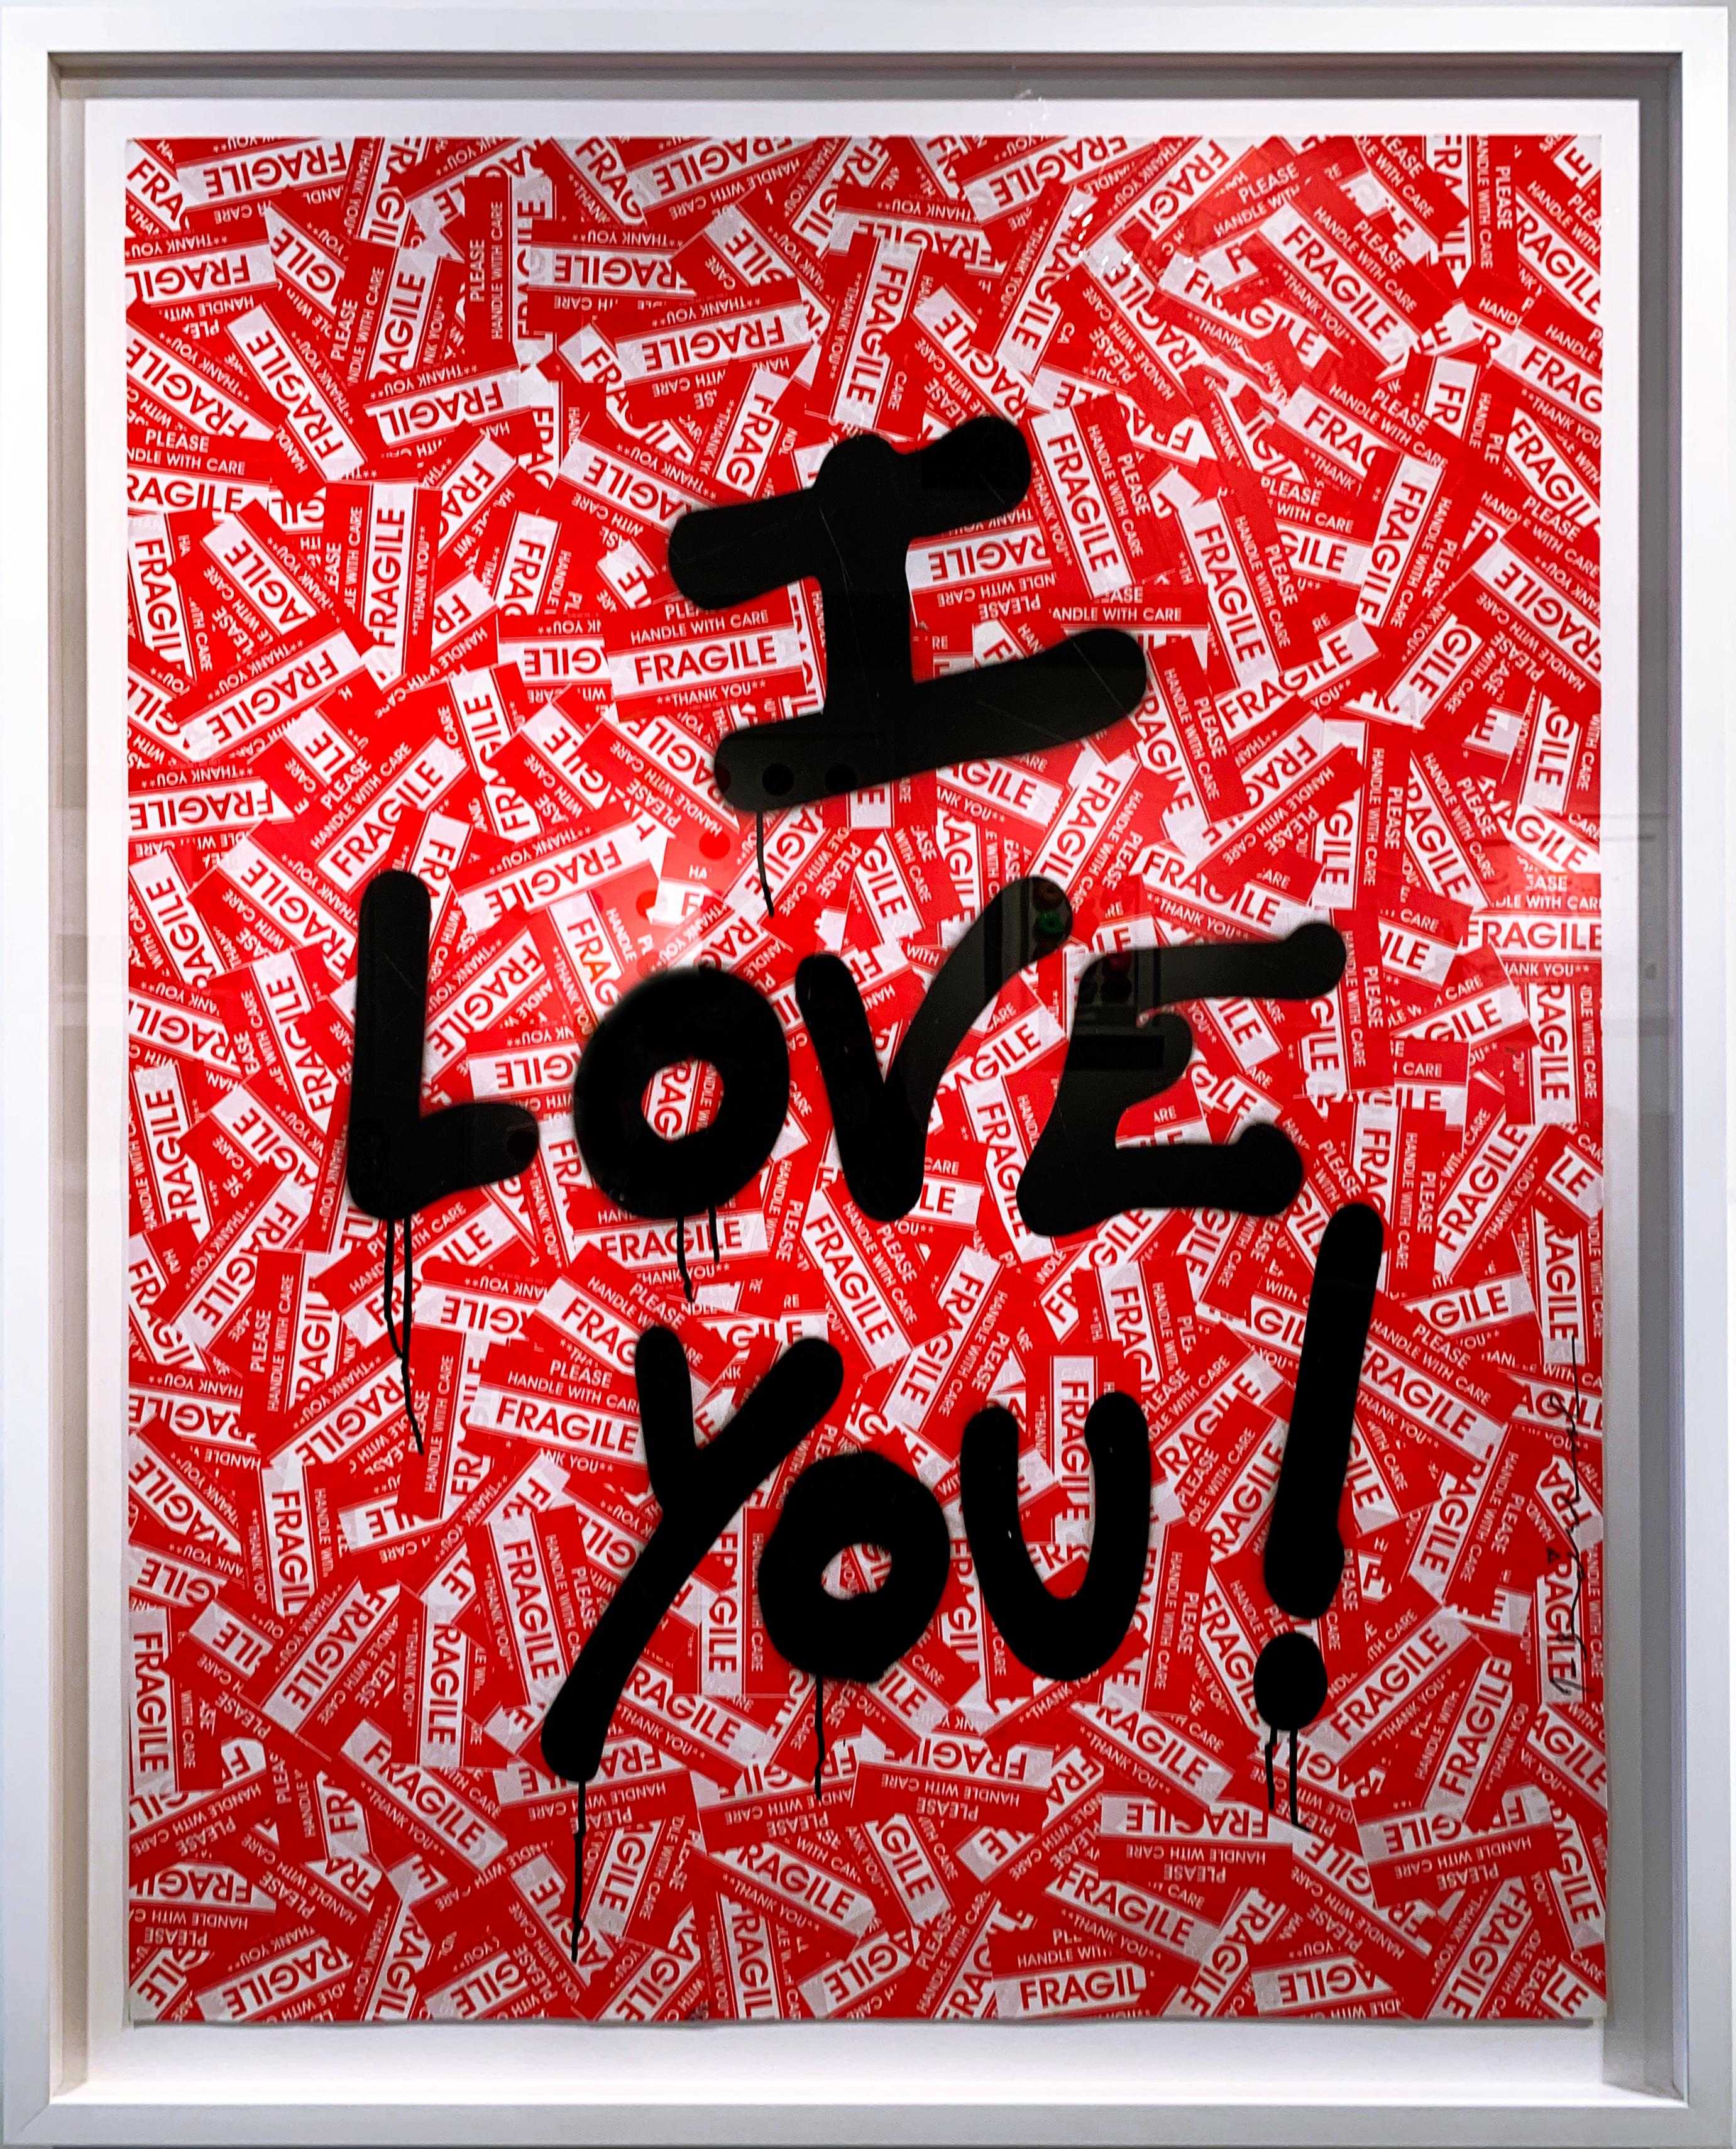 Contemporary Art - Mixed media on canvas - I love you dressed in